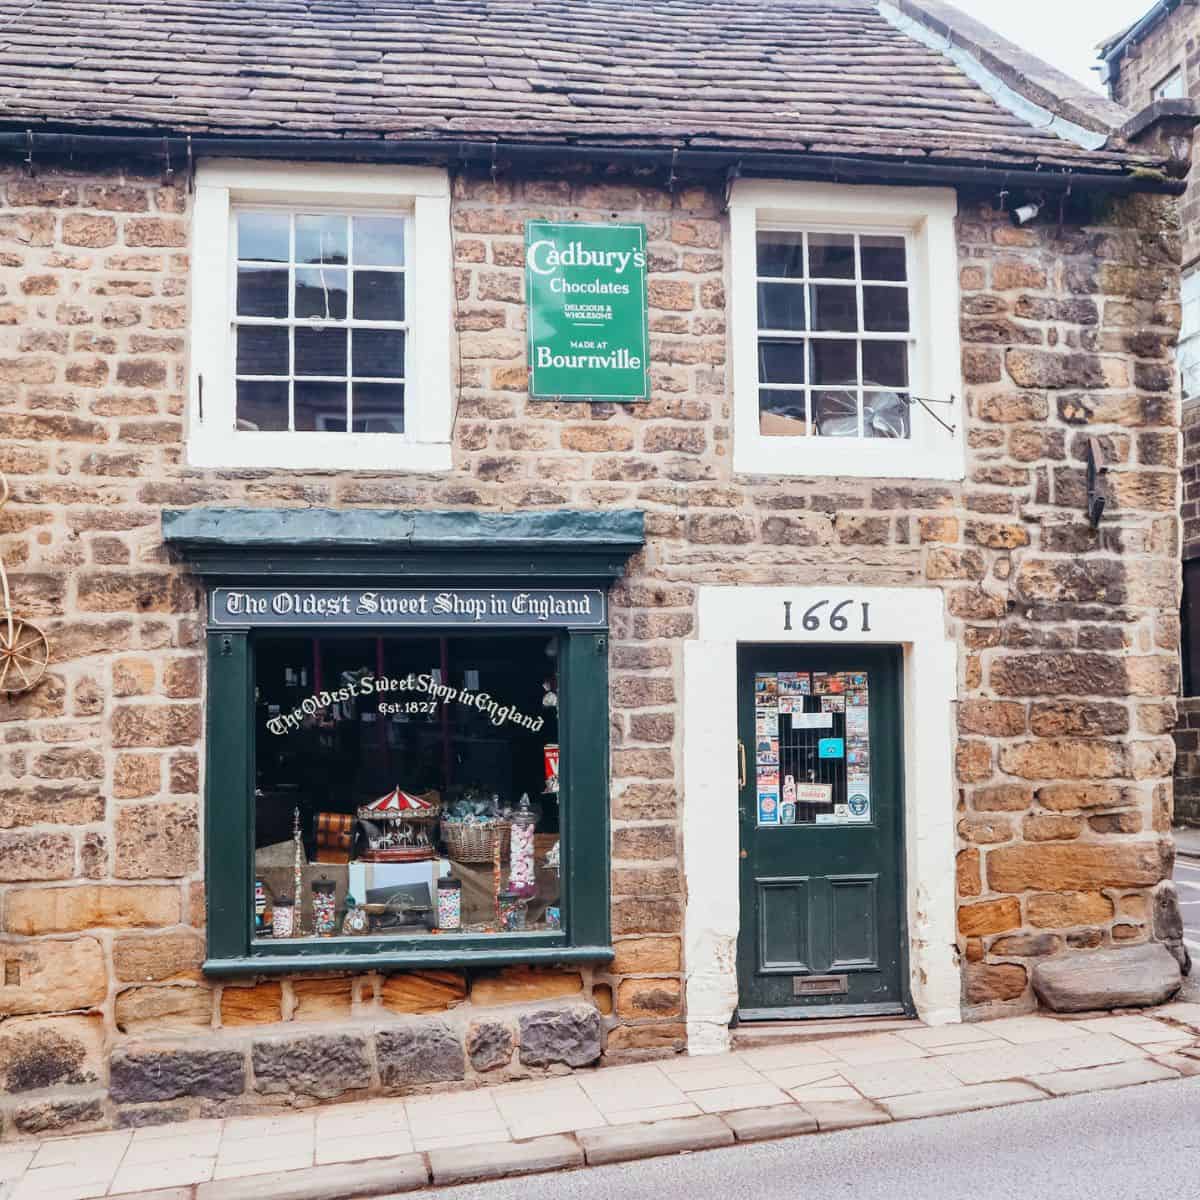 The Oldest Sweet Shop in England at Pateley Bridhe in Yorkshire